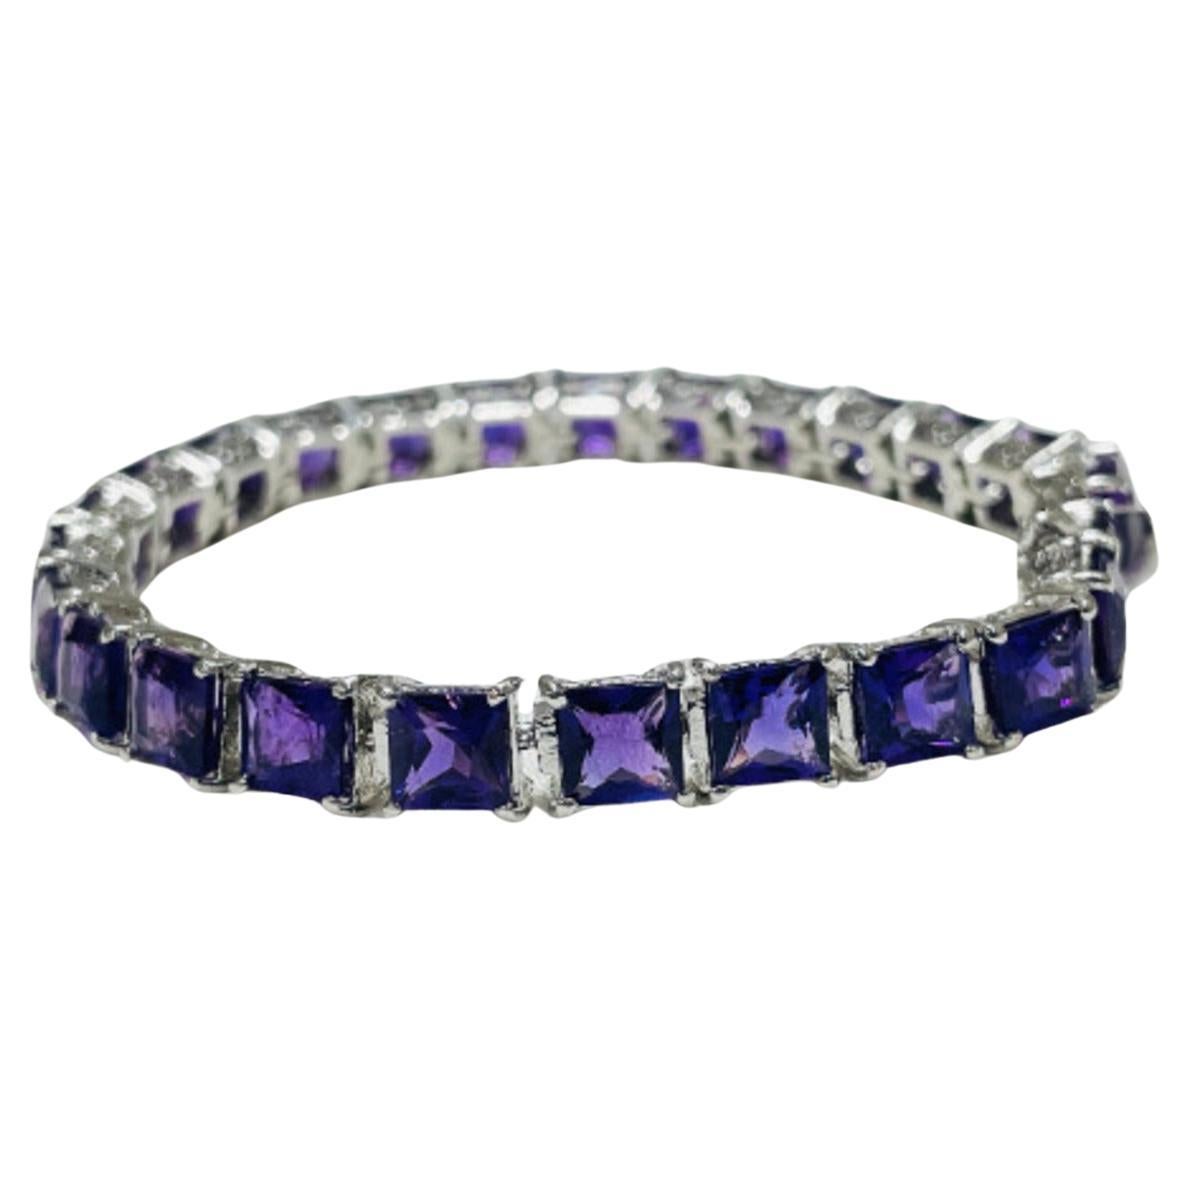 Faceted Square Cut Amethyst Line Bracelet in Sterling Silver for Her